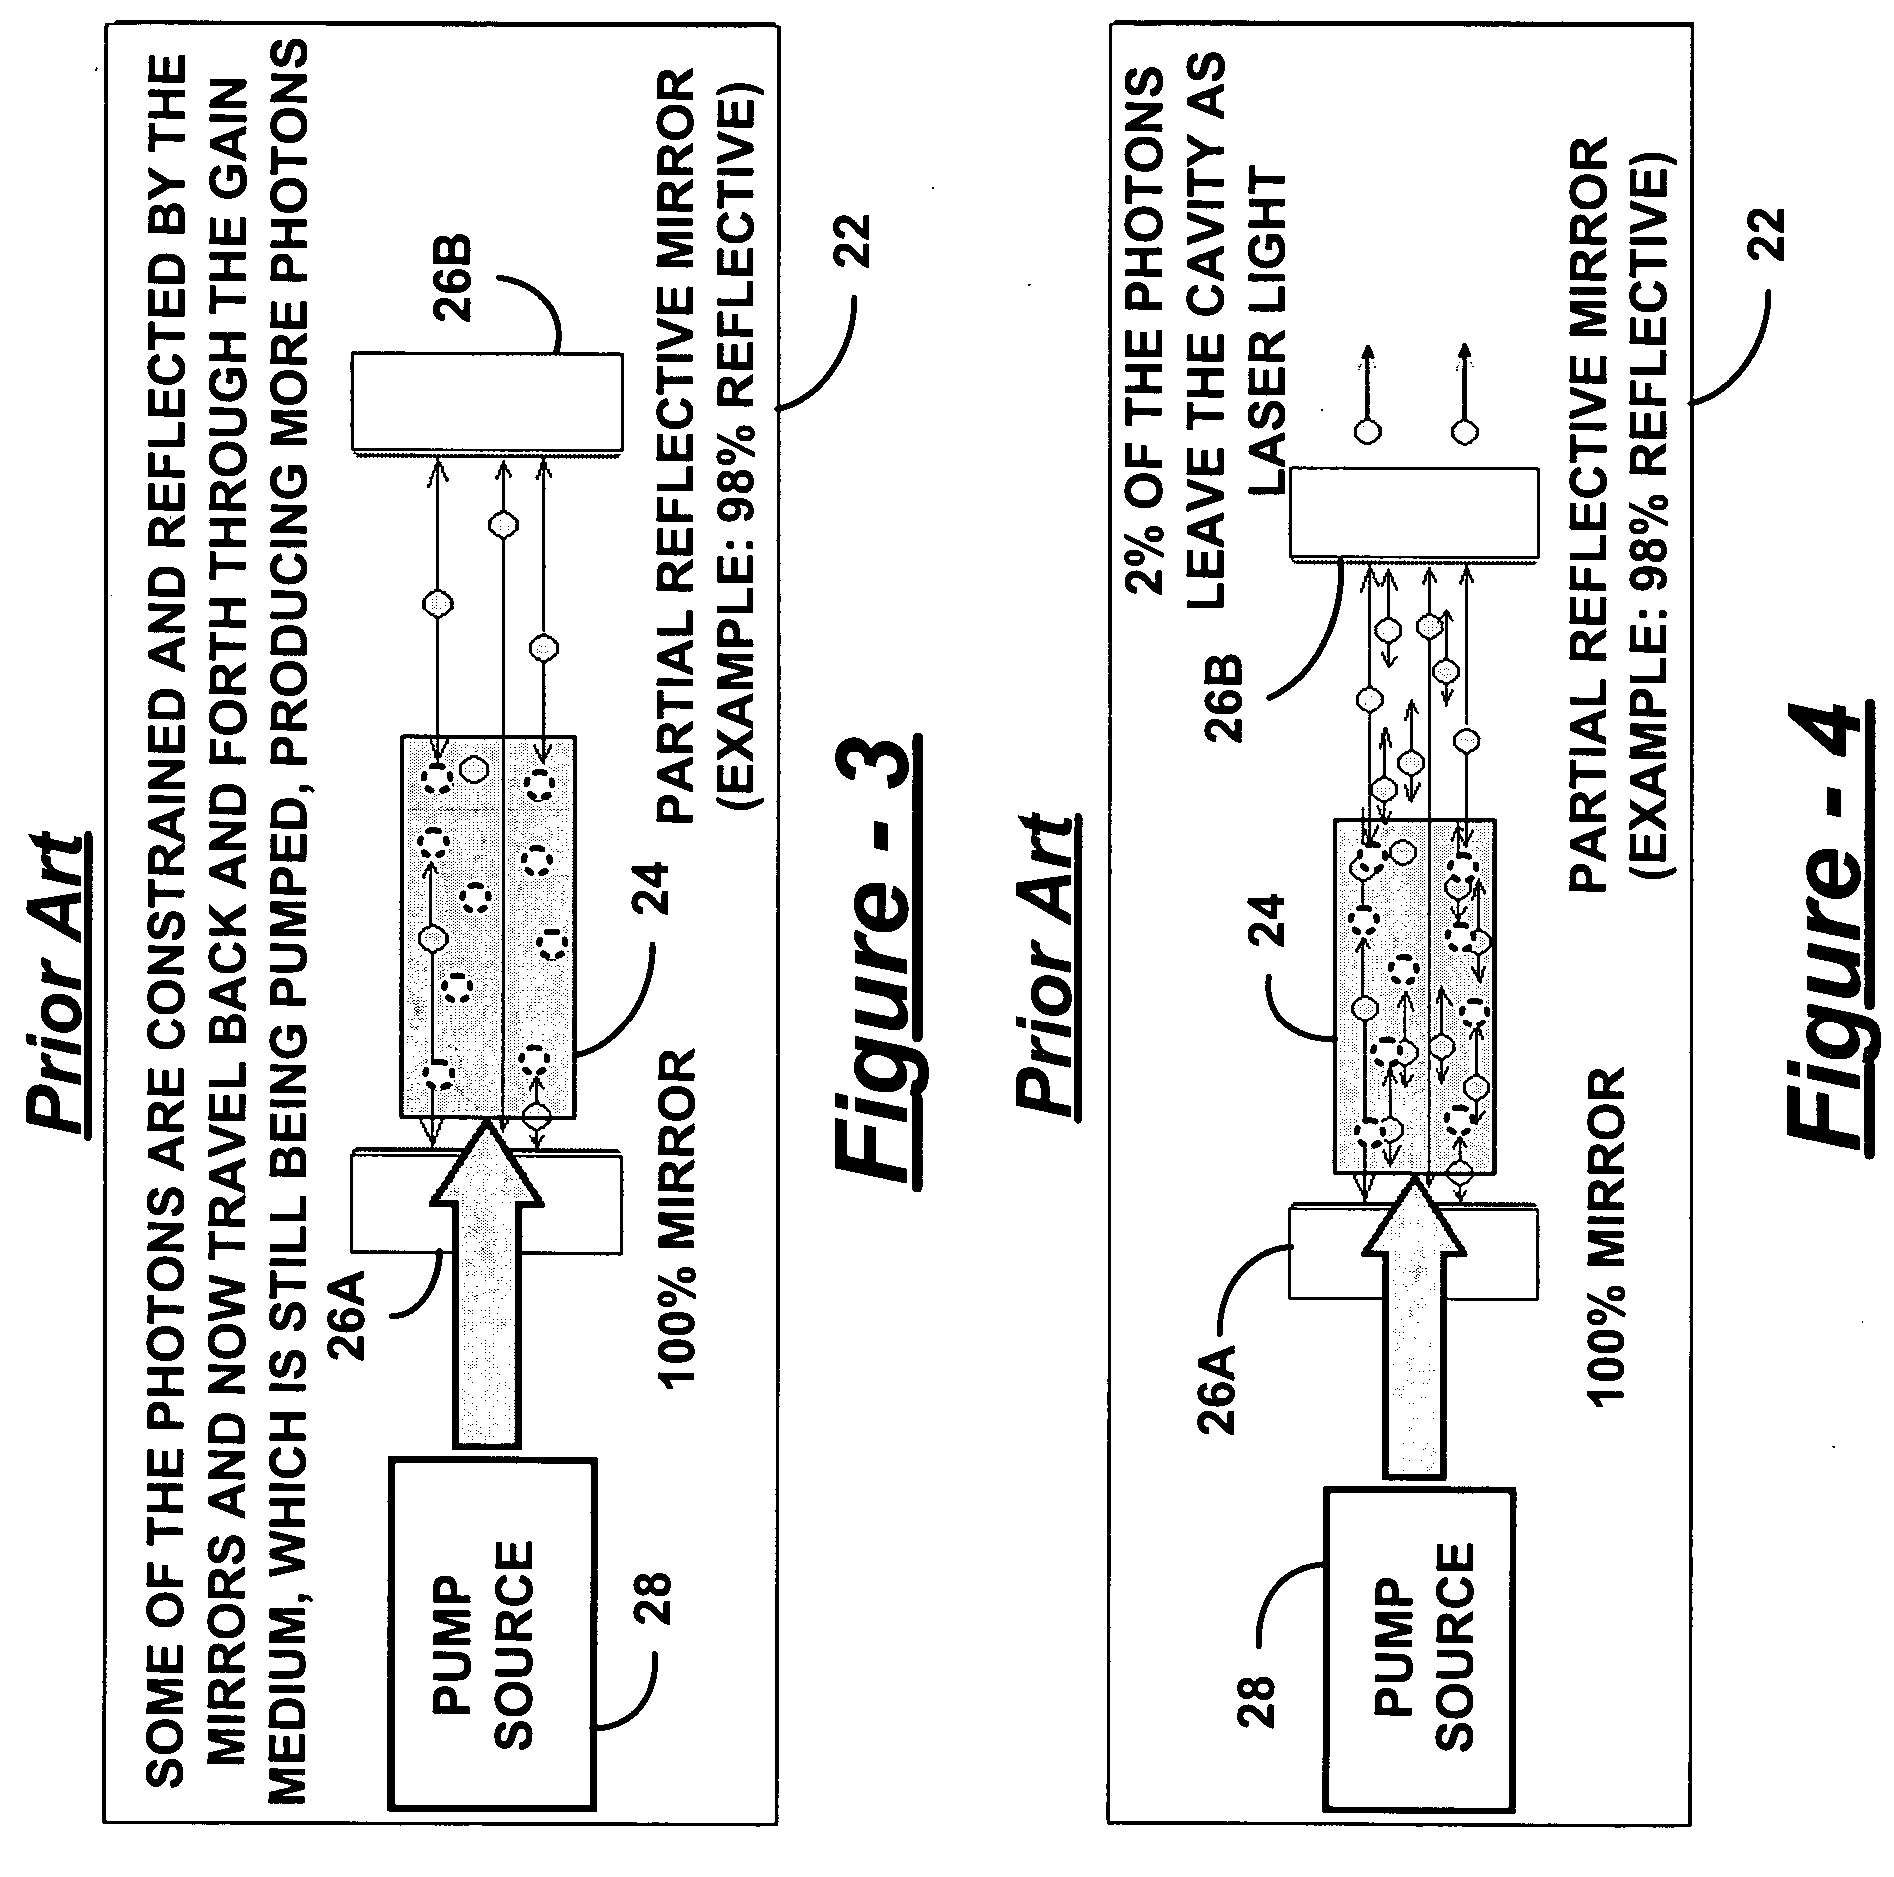 Slab laser amplifier with parasitic oscillation suppression